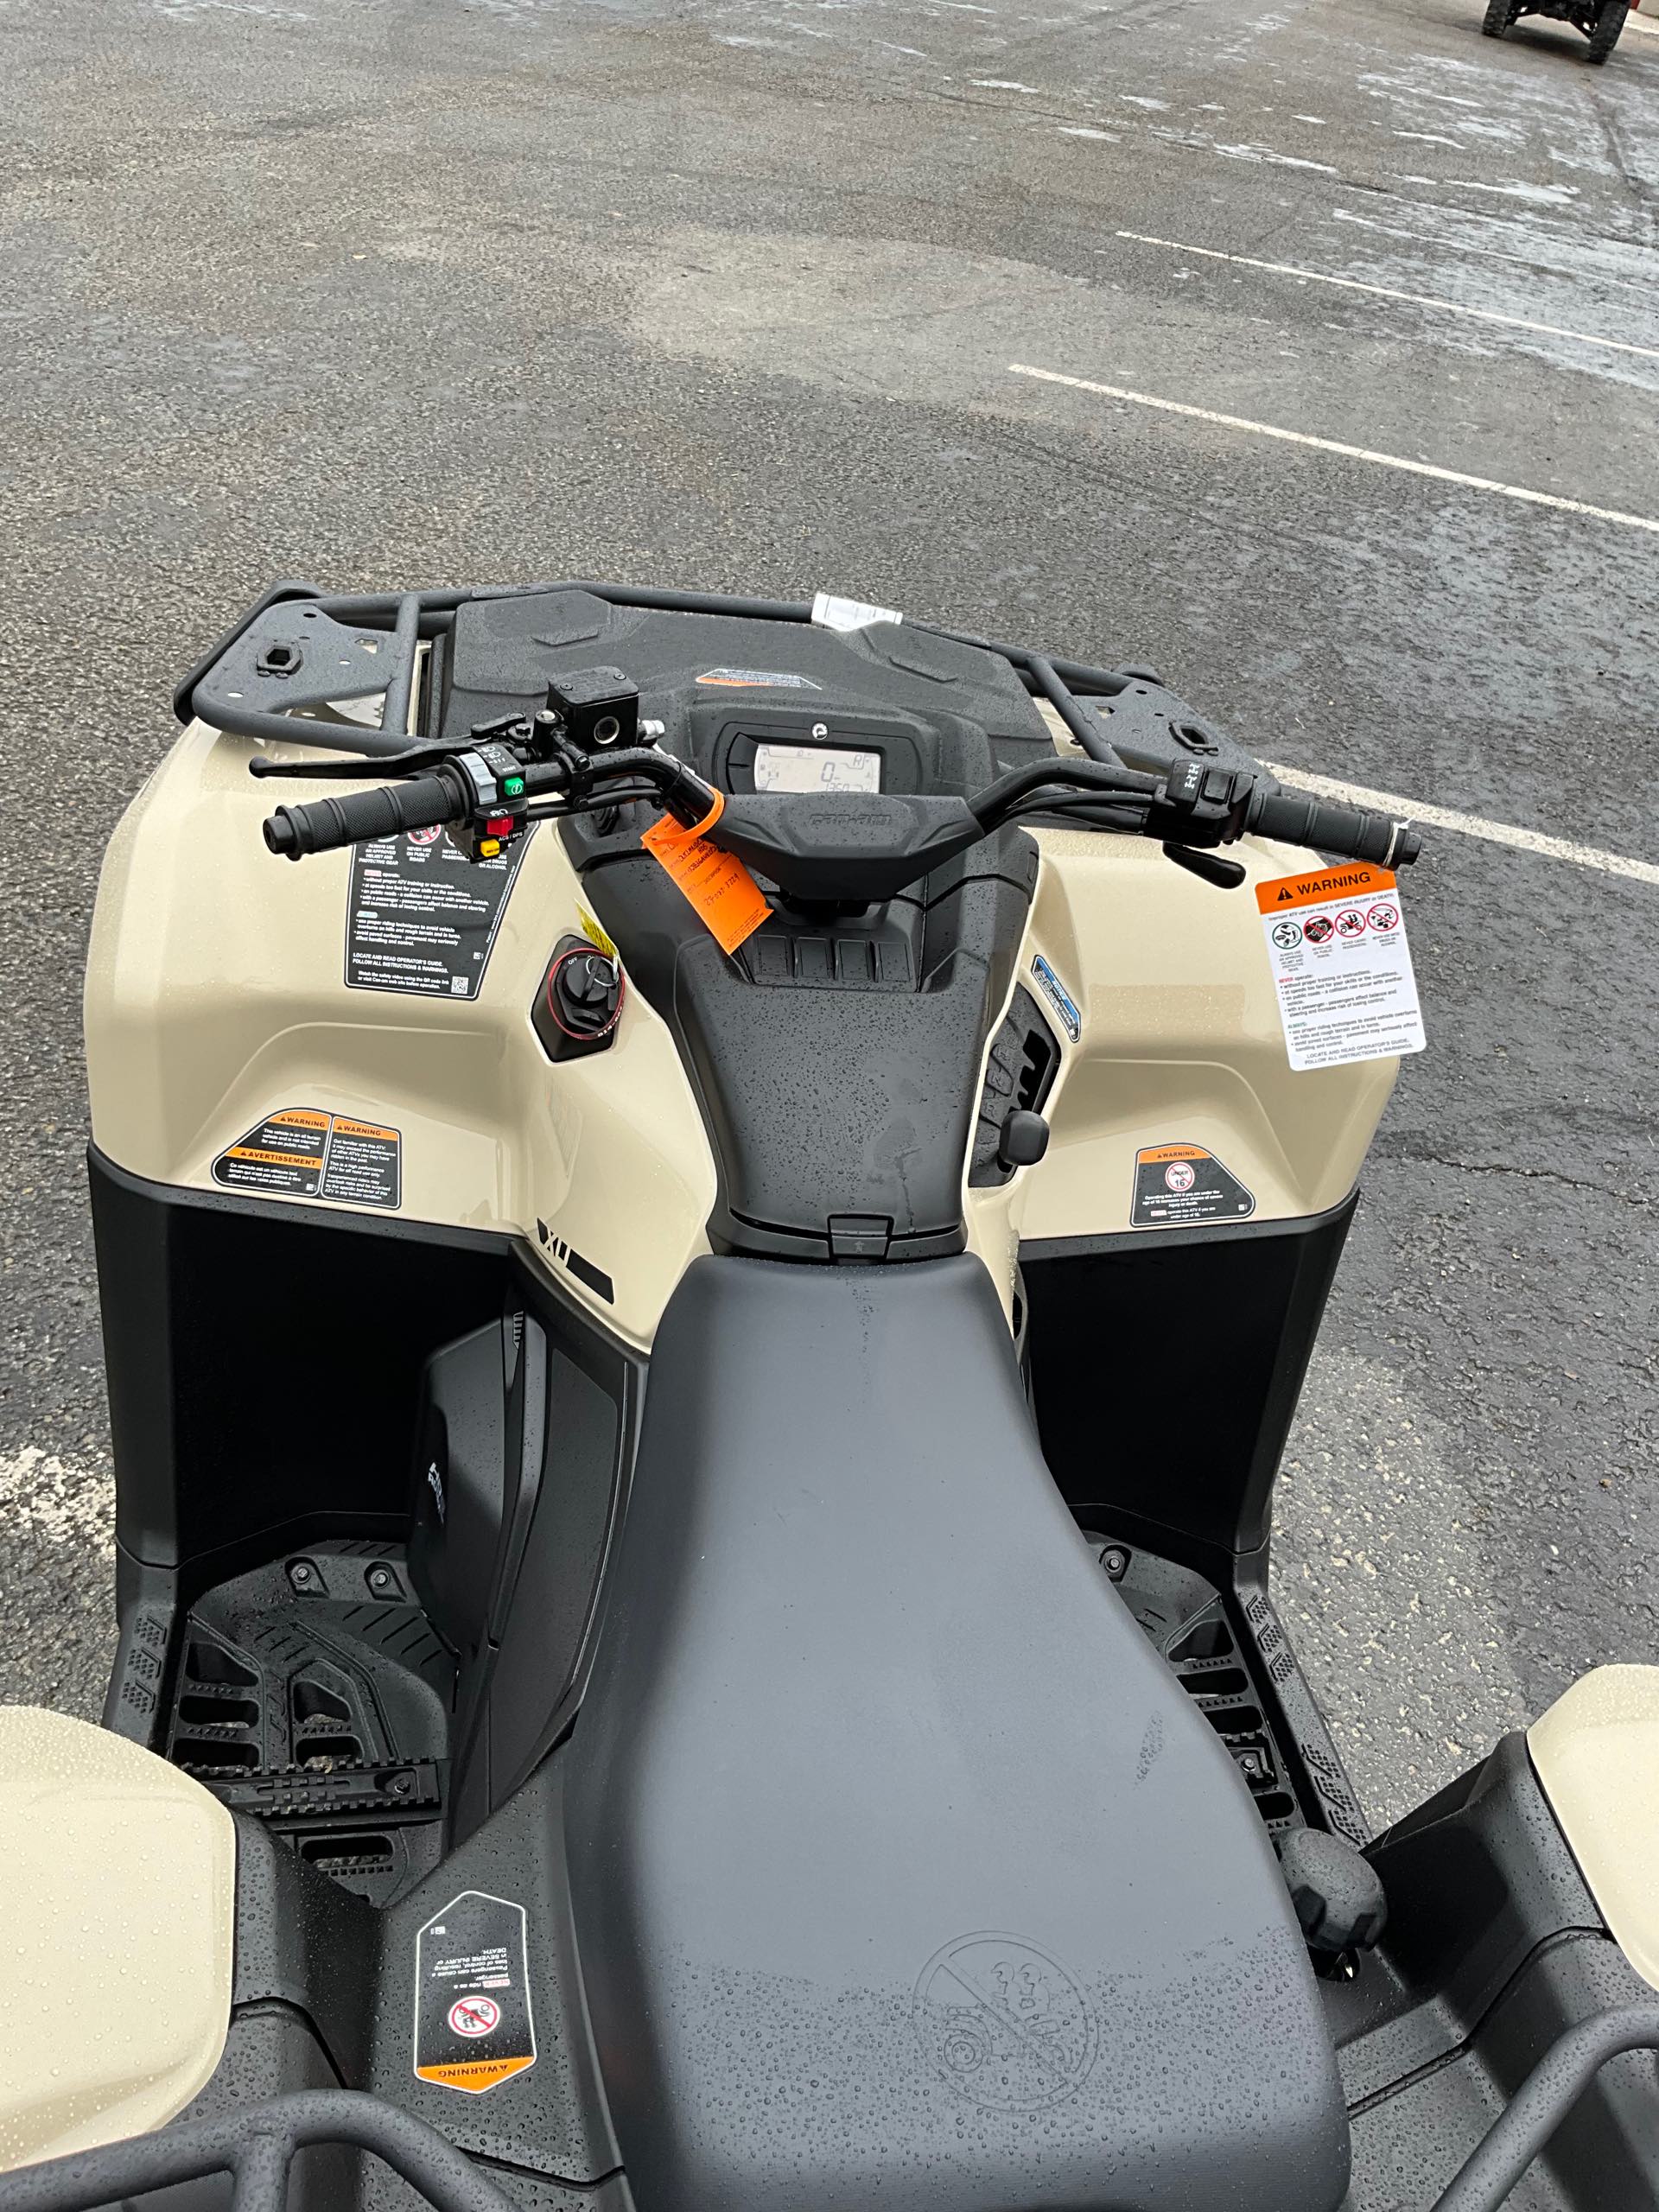 2023 Can-Am Outlander Pro HD5 at Leisure Time Powersports of Corry